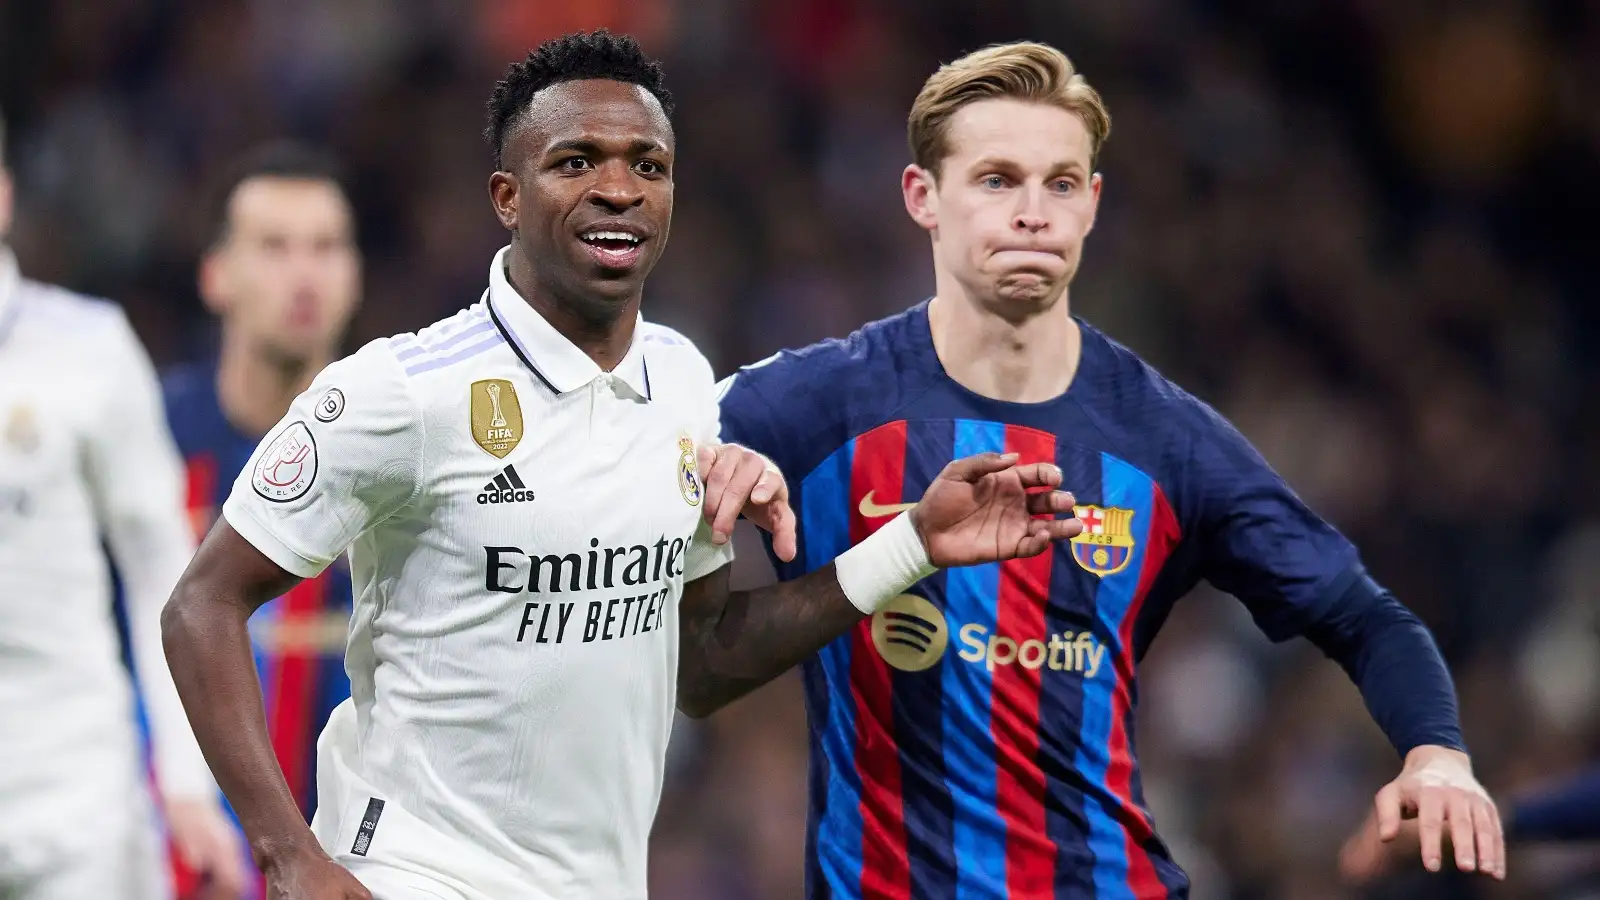 Vini Jr & Frenkie de Jong turned a dull El Clasico into exciting WWE